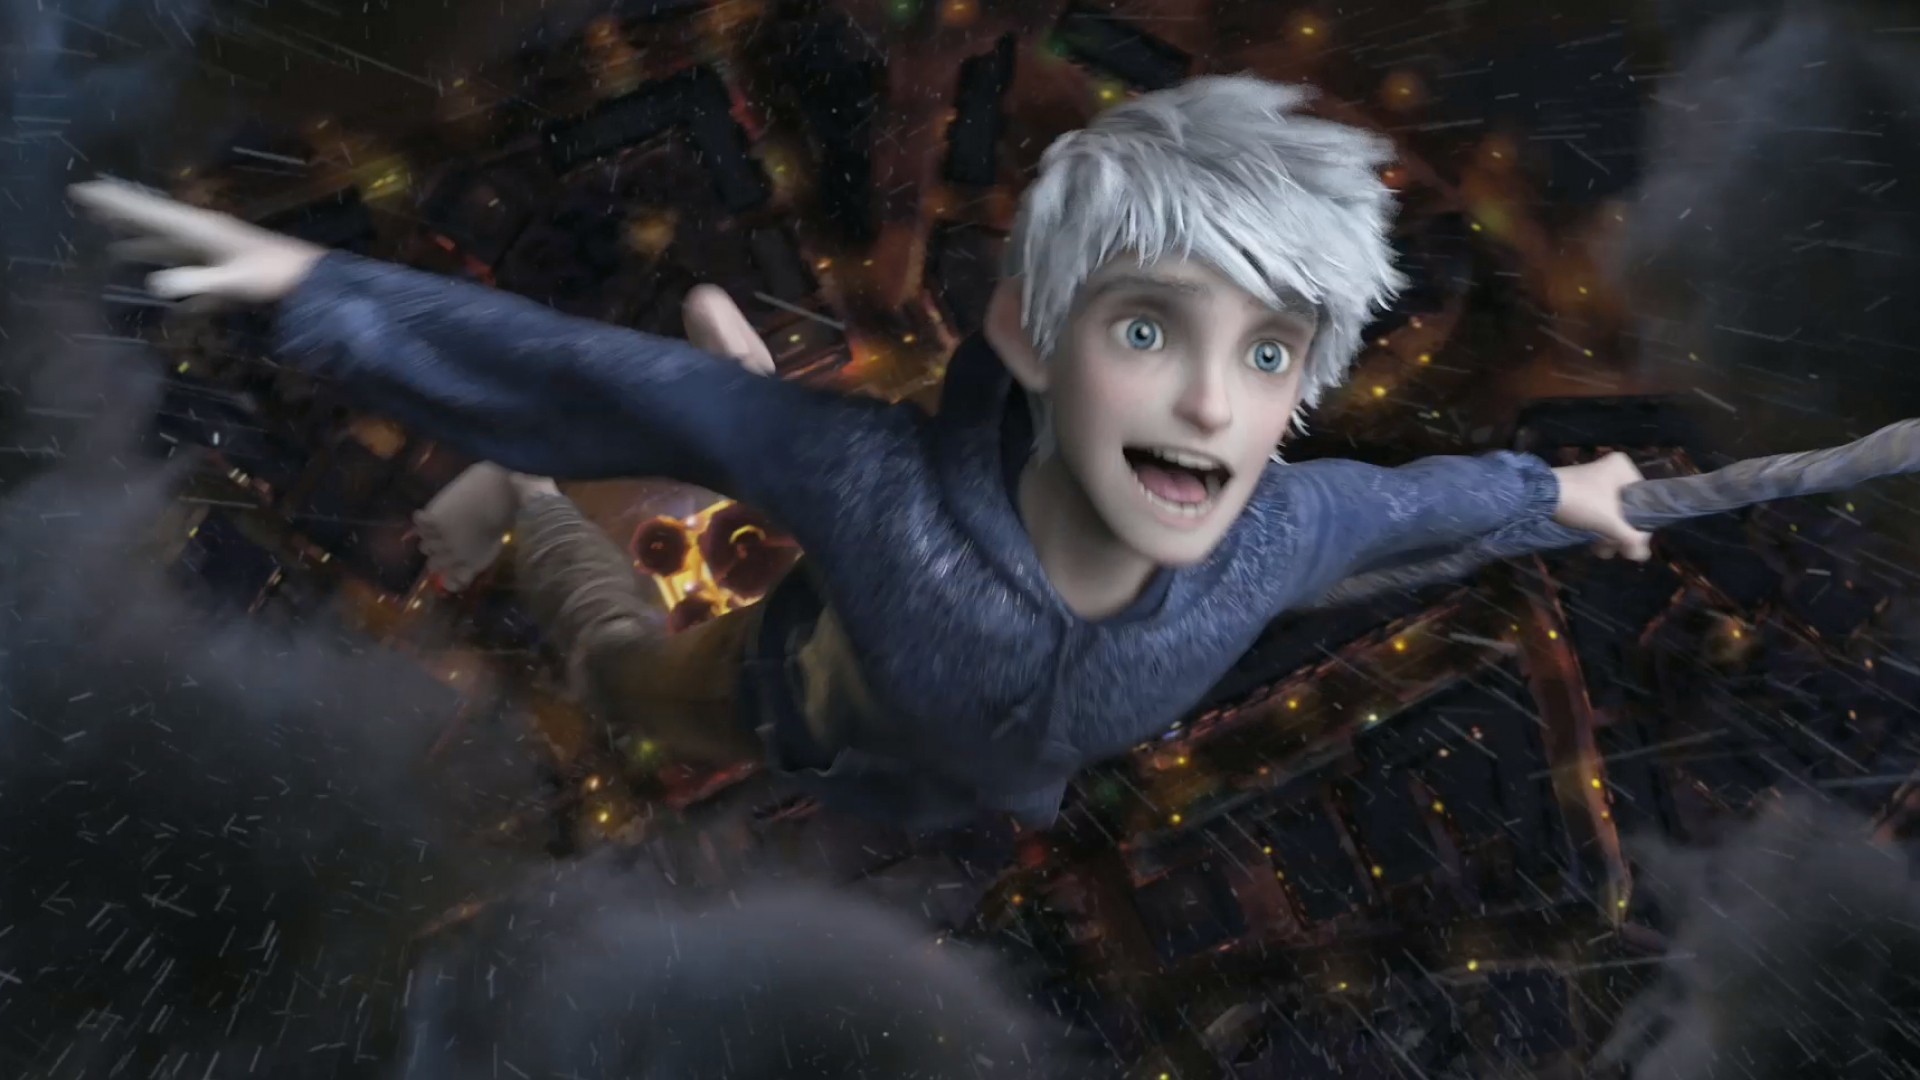 1920x1080 Jack Frost - Jack Frost - Rise of the Guardians Wallpap...